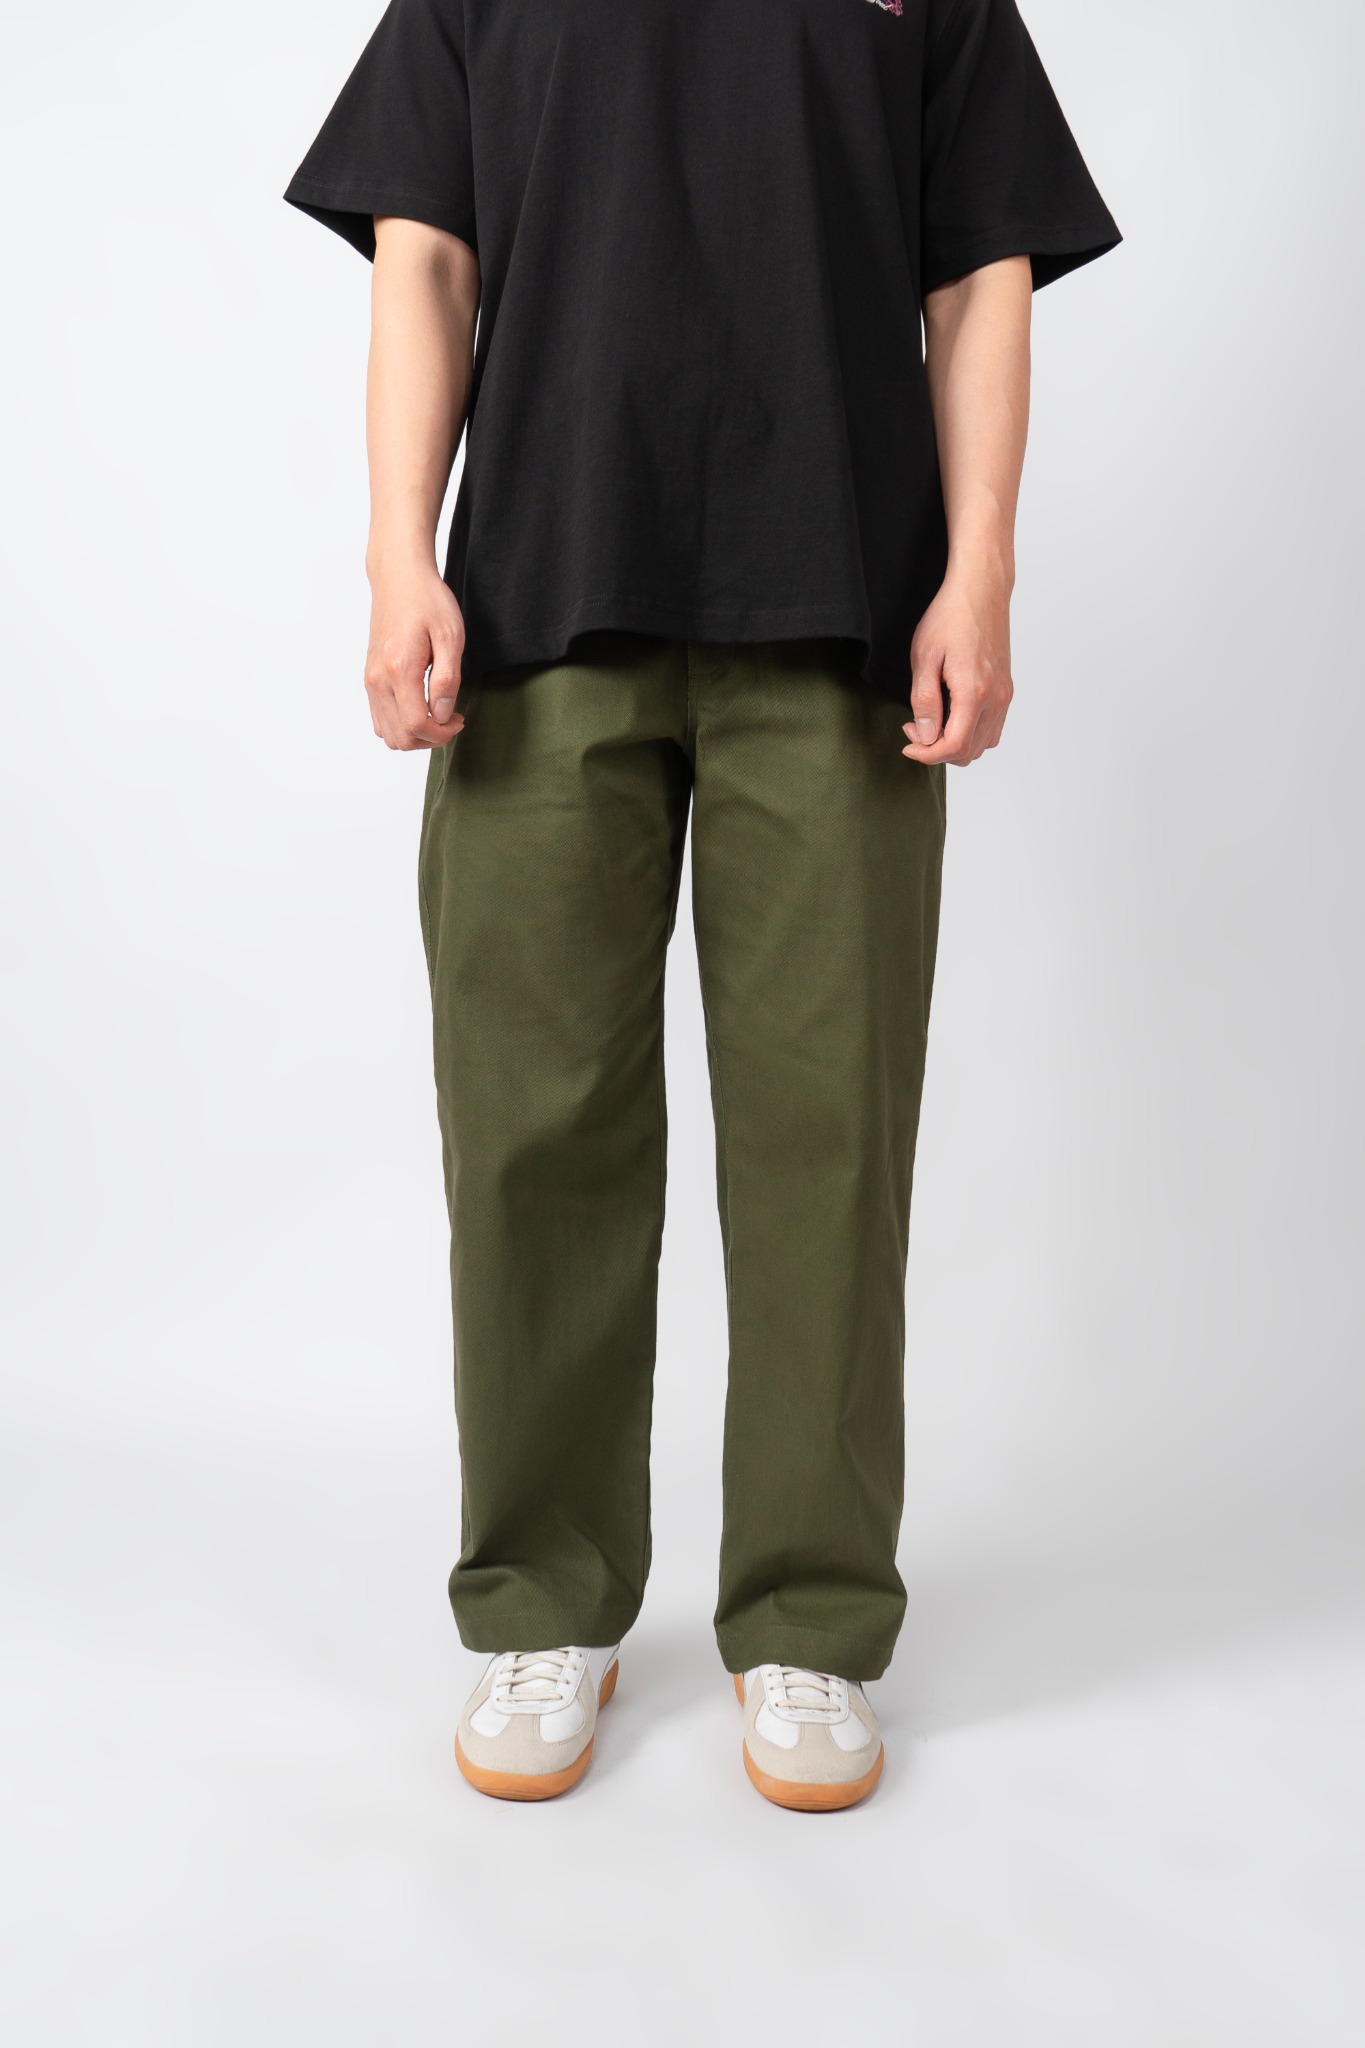  DARKGREEN RELAXED FIT CHINO PANTS 